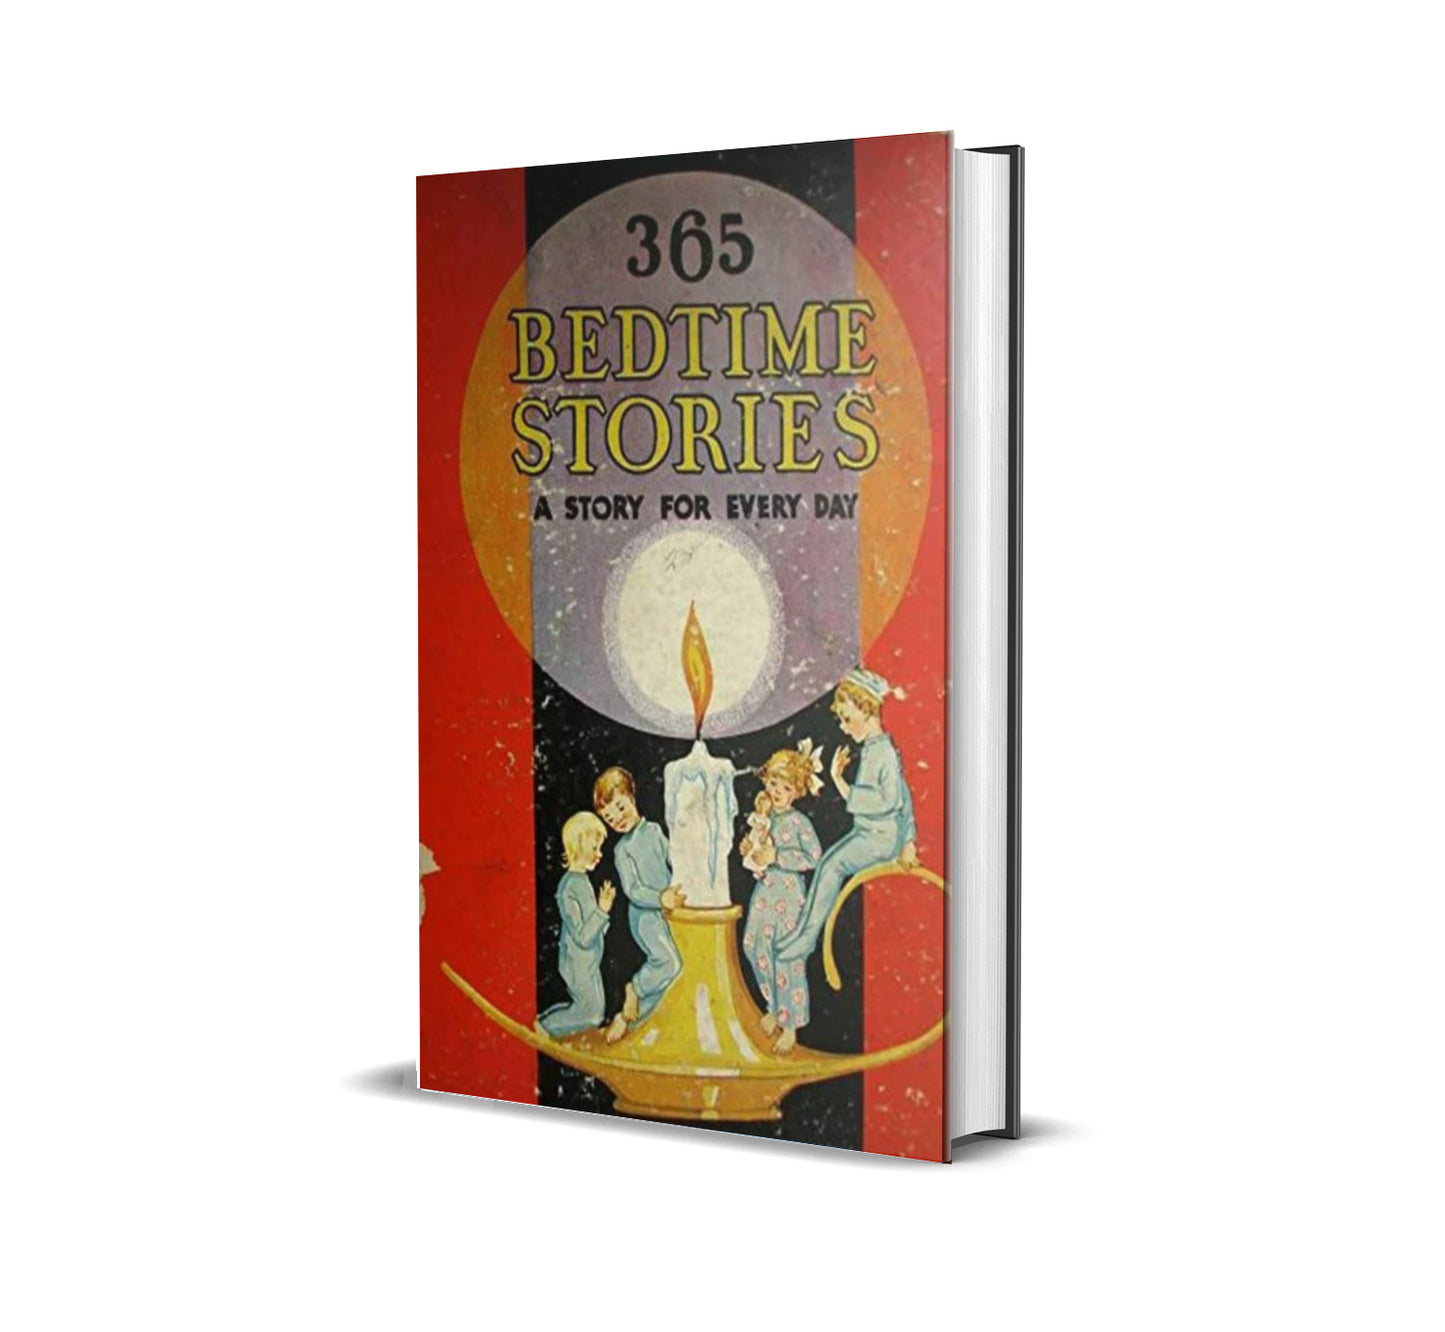 365 Bedtime Stories by Mary Graham Bonner